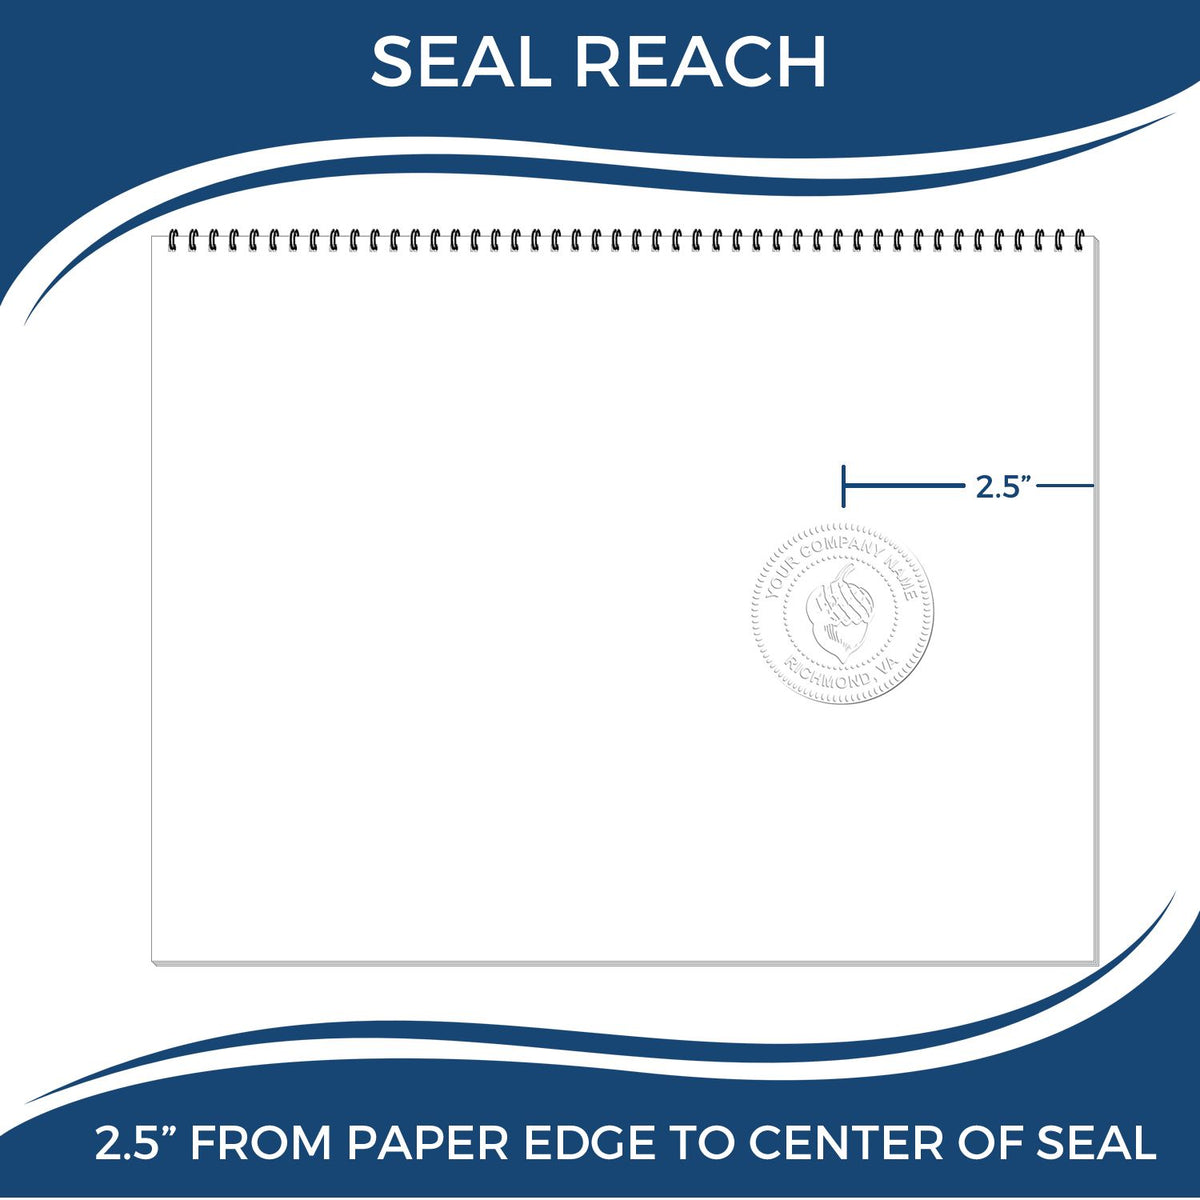 An infographic showing the seal reach which is represented by a ruler and a miniature seal image of the Heavy Duty Cast Iron Idaho Architect Embosser